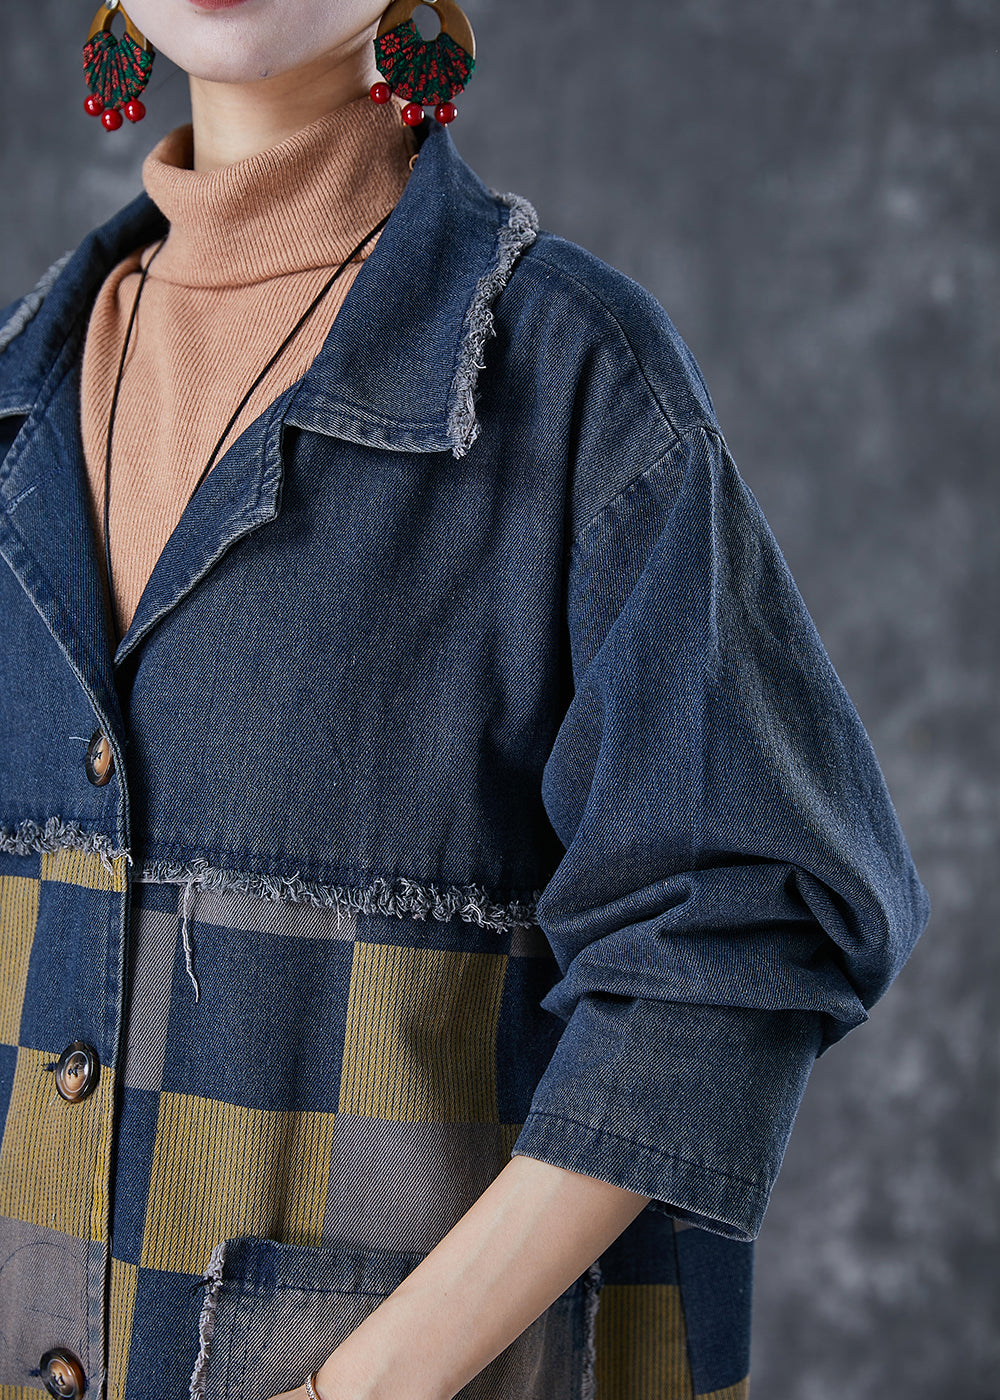 French Navy Oversized Patchwork Plaid Denim Coats Fall